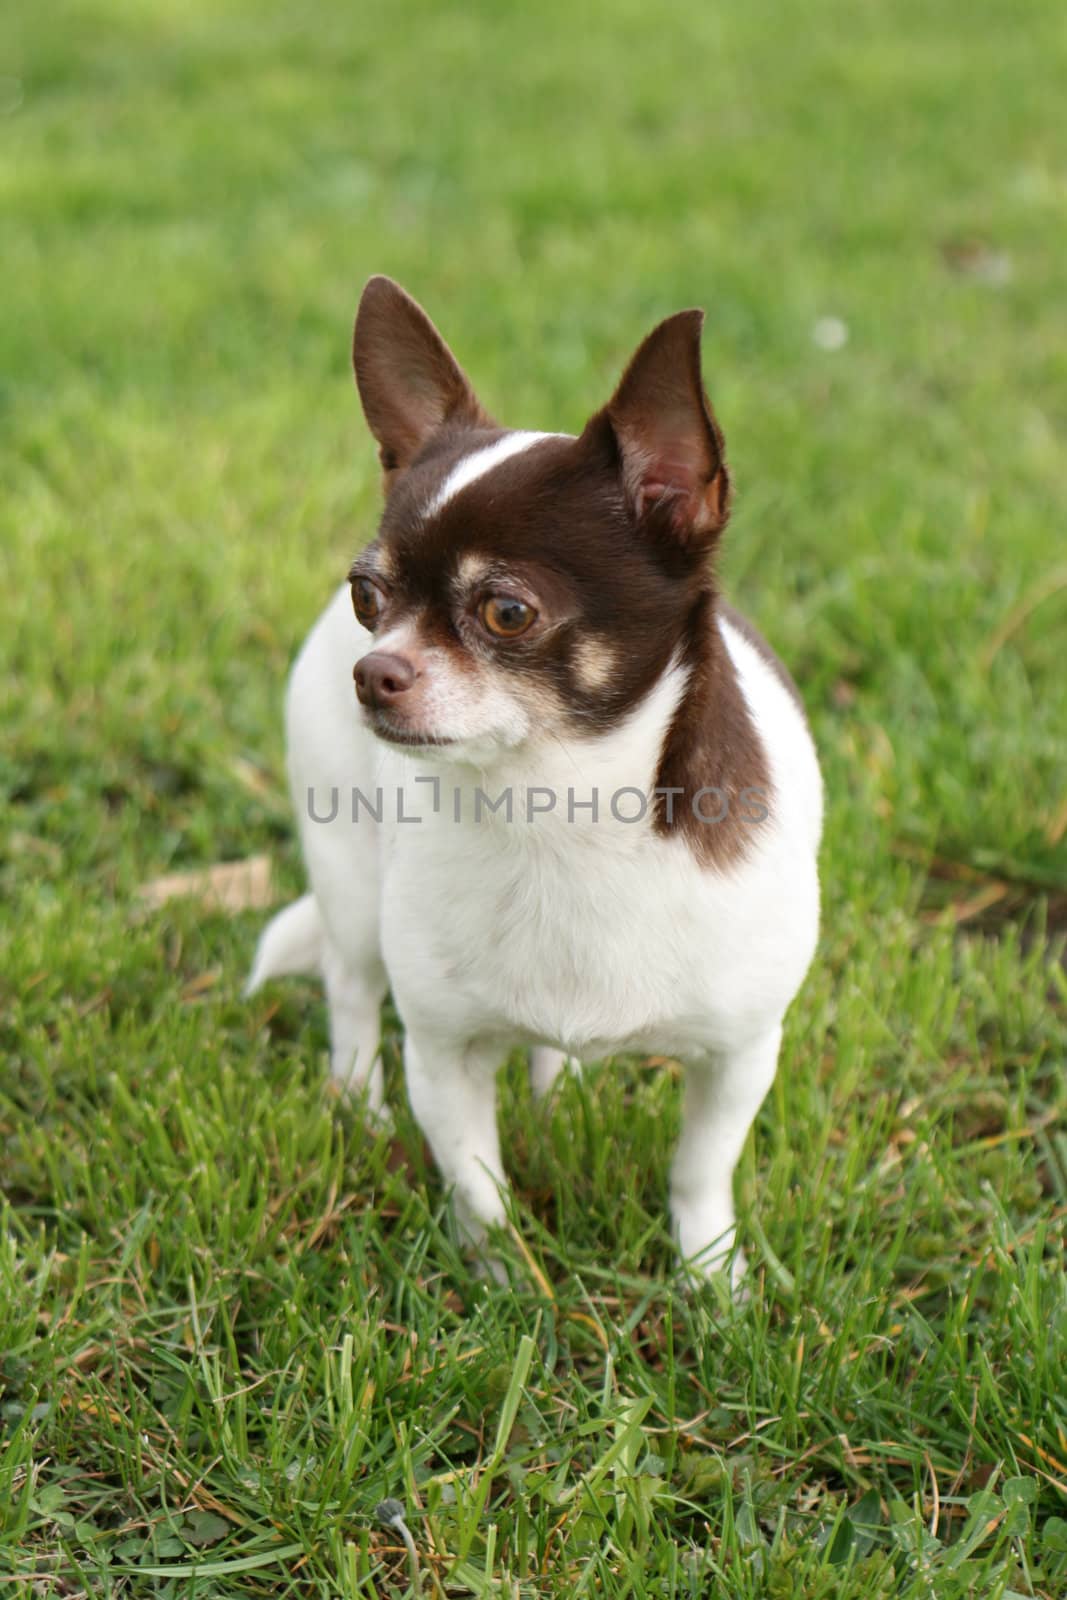 a little dog chihuahua on the grass